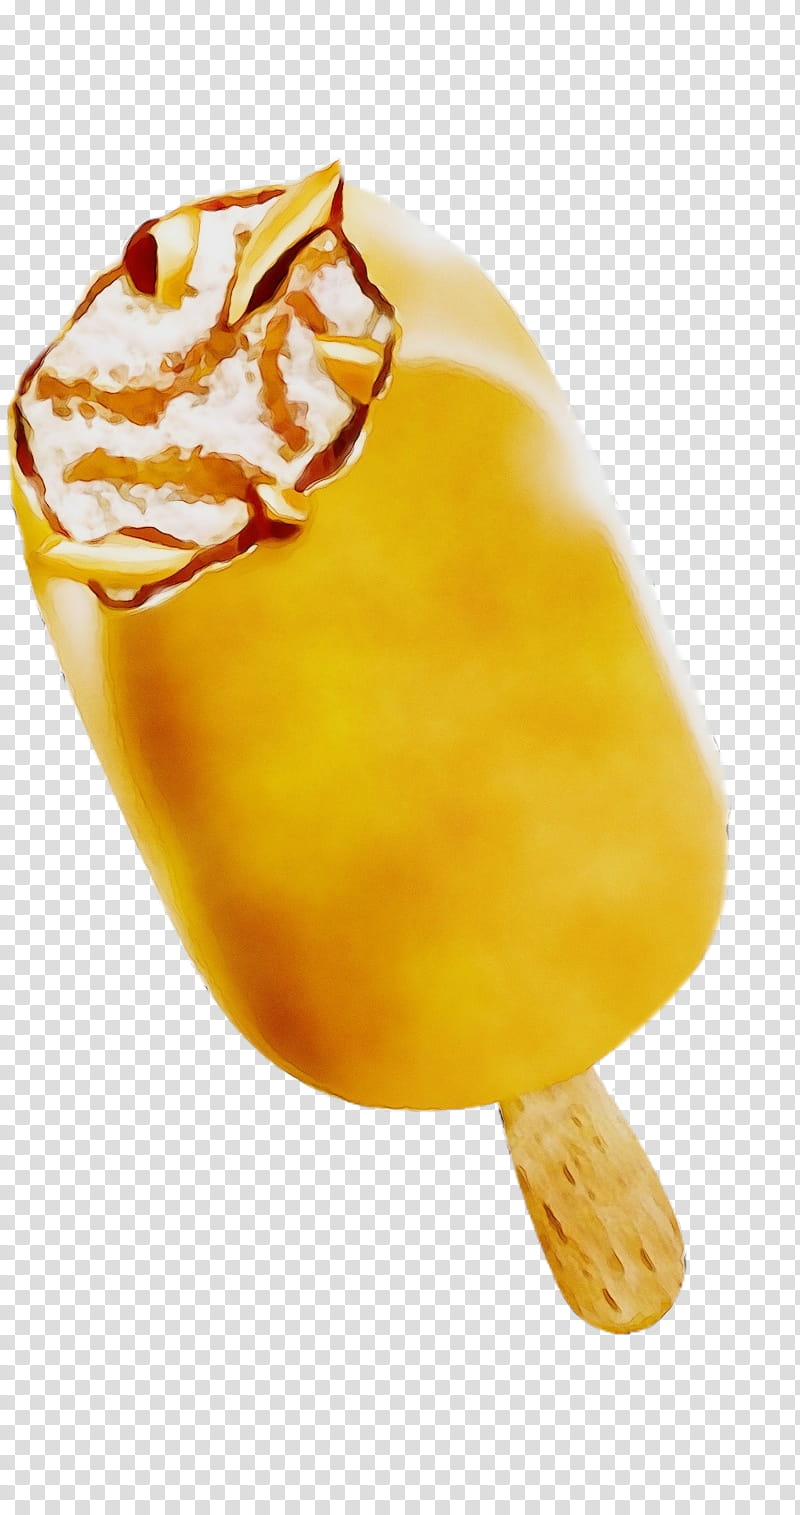 Ice cream, Watercolor, Paint, Wet Ink, Frozen Dessert, Ice Cream Bar, Ice Pop, Food, Yellow, American Food transparent background PNG clipart